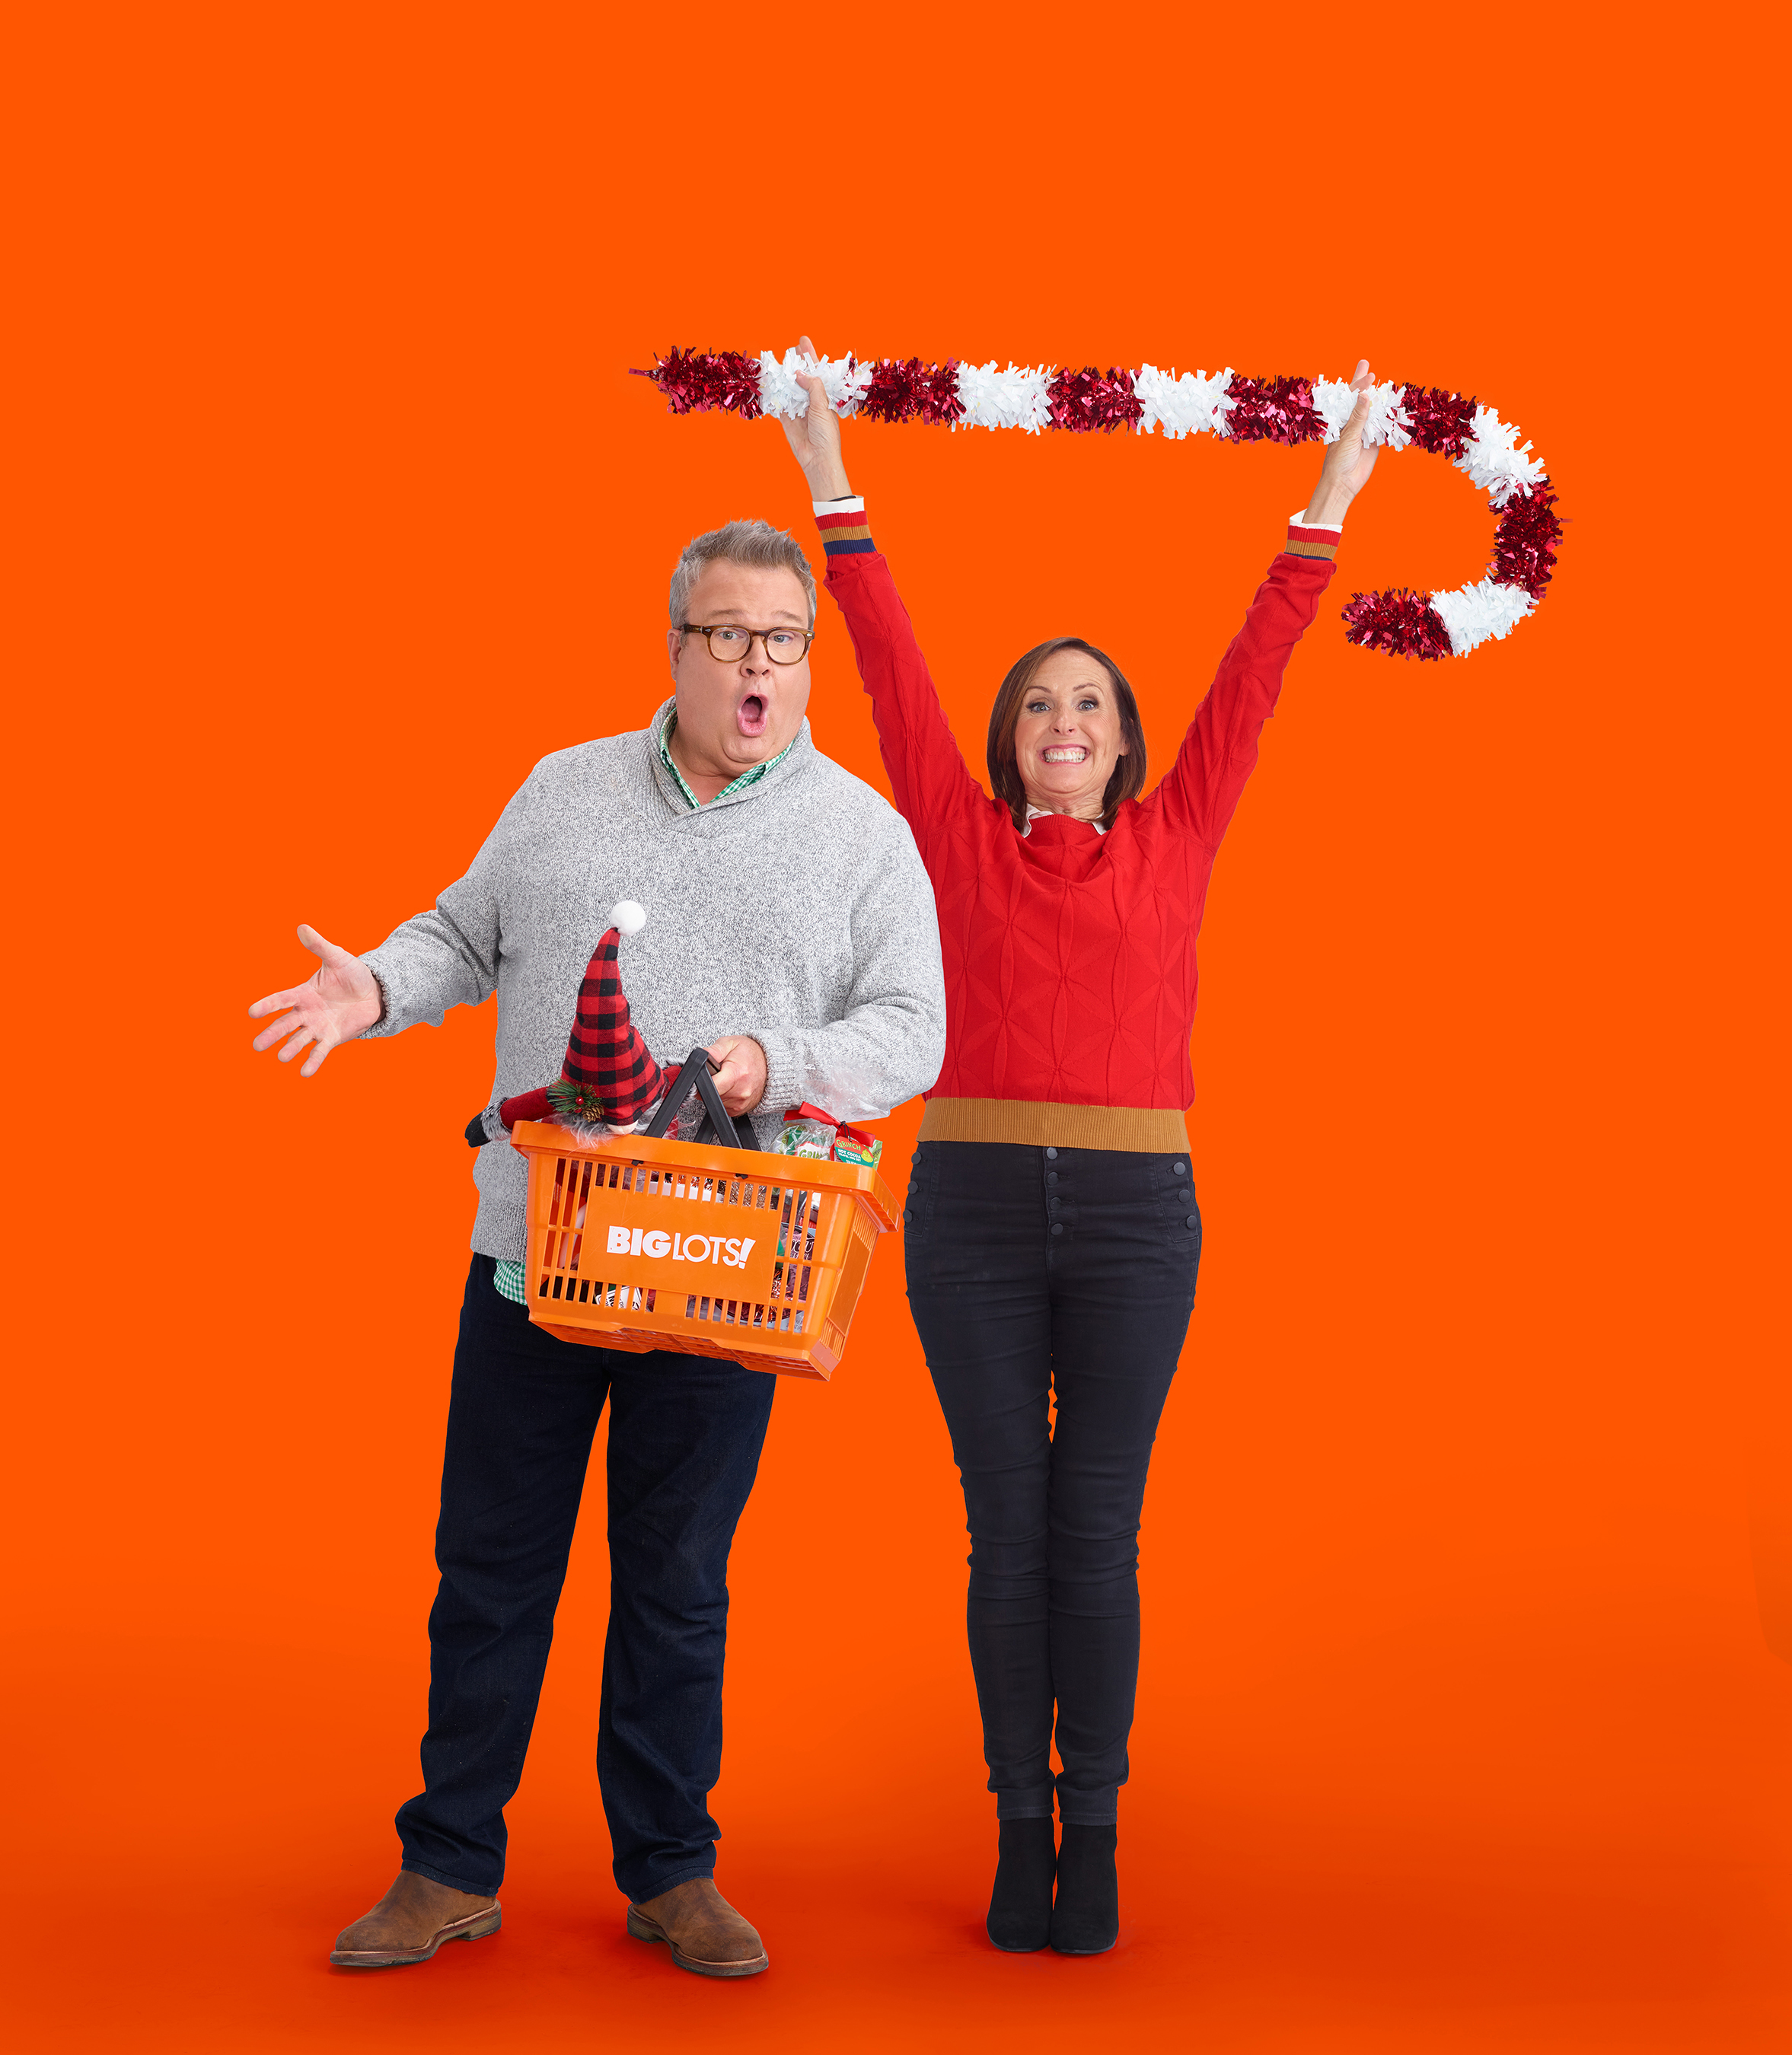 Big Lots’ holiday campaign, airing now, comes to life in a series of national spots.